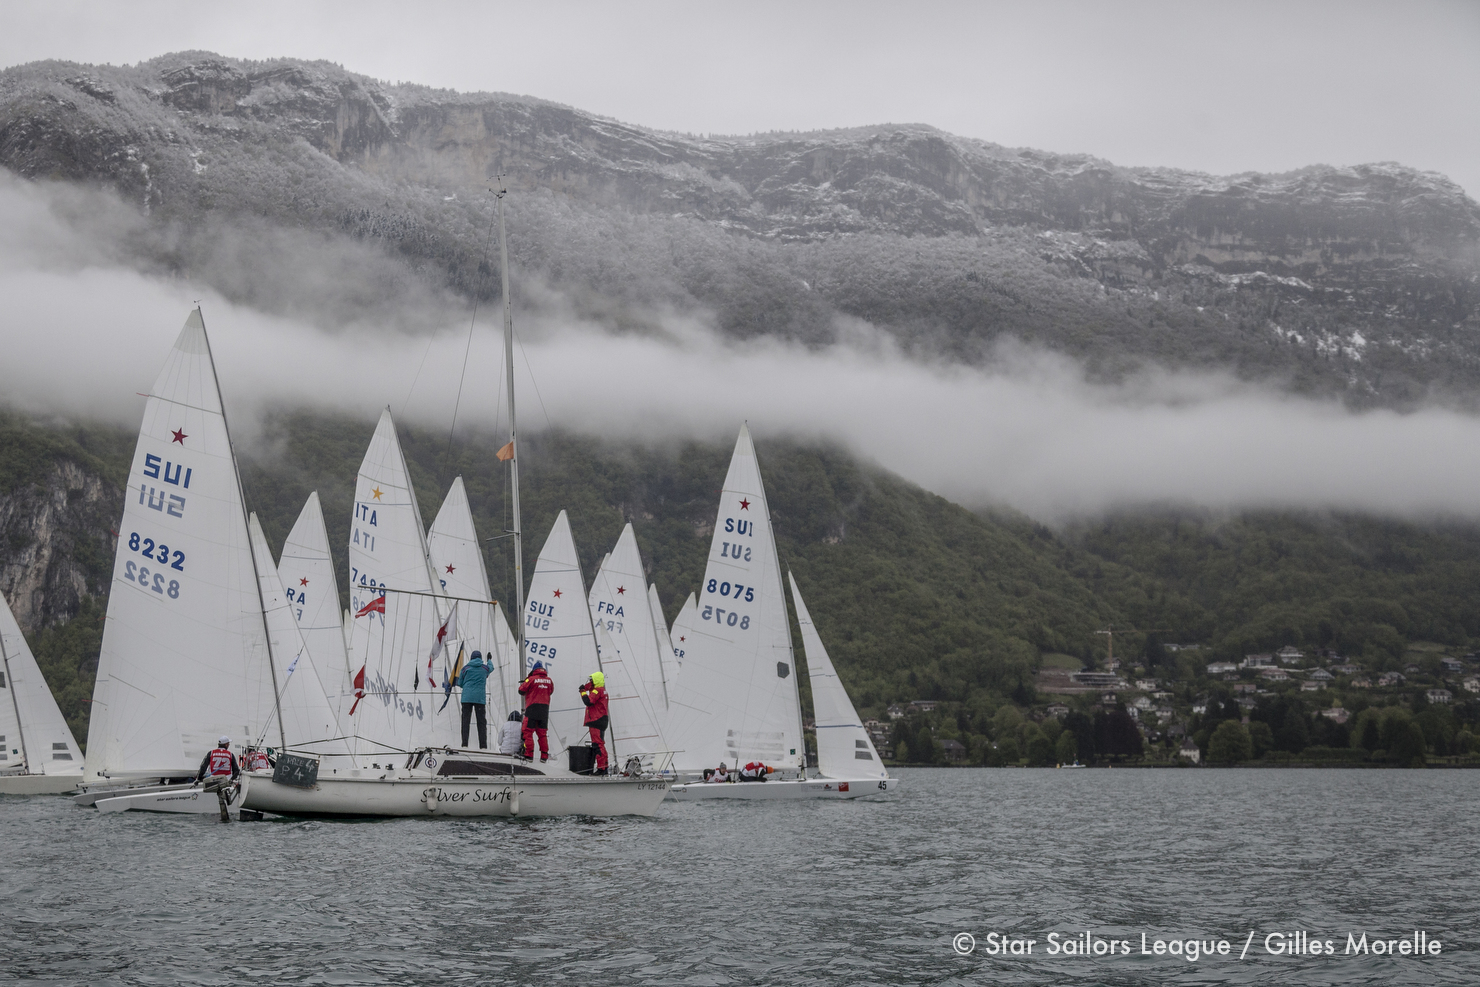  Star  District + French Championship  Annecy FRA  Final results, Sternberg/Christenson USA 13th